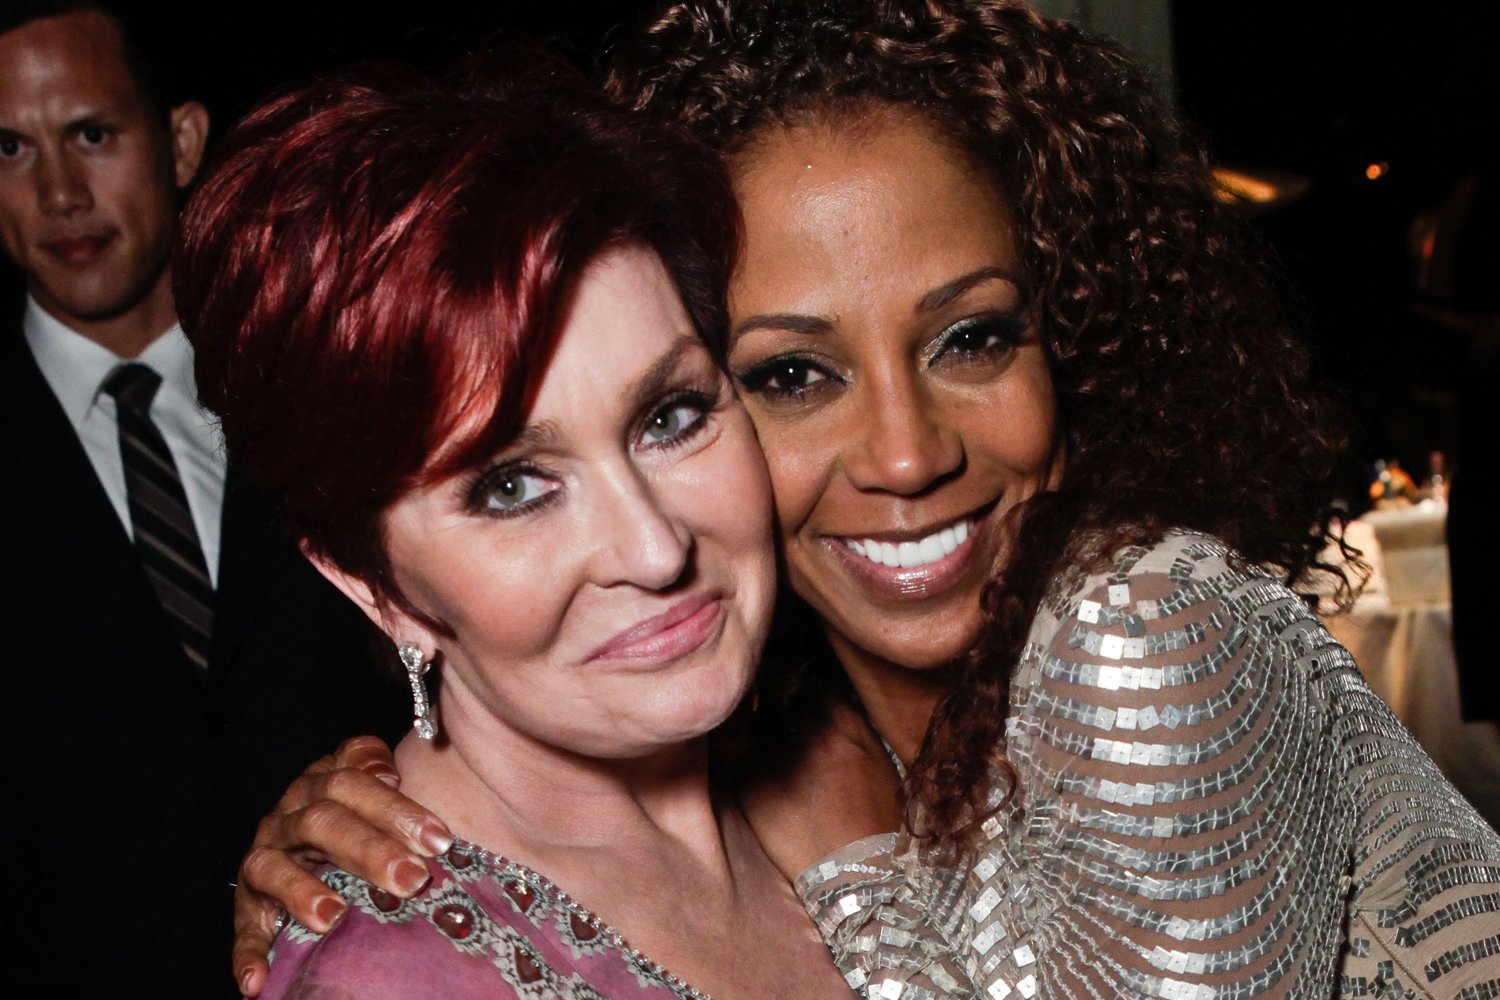 Sharon Osbourne and Holly Robinson Peete embracing each other and smiling for the camera